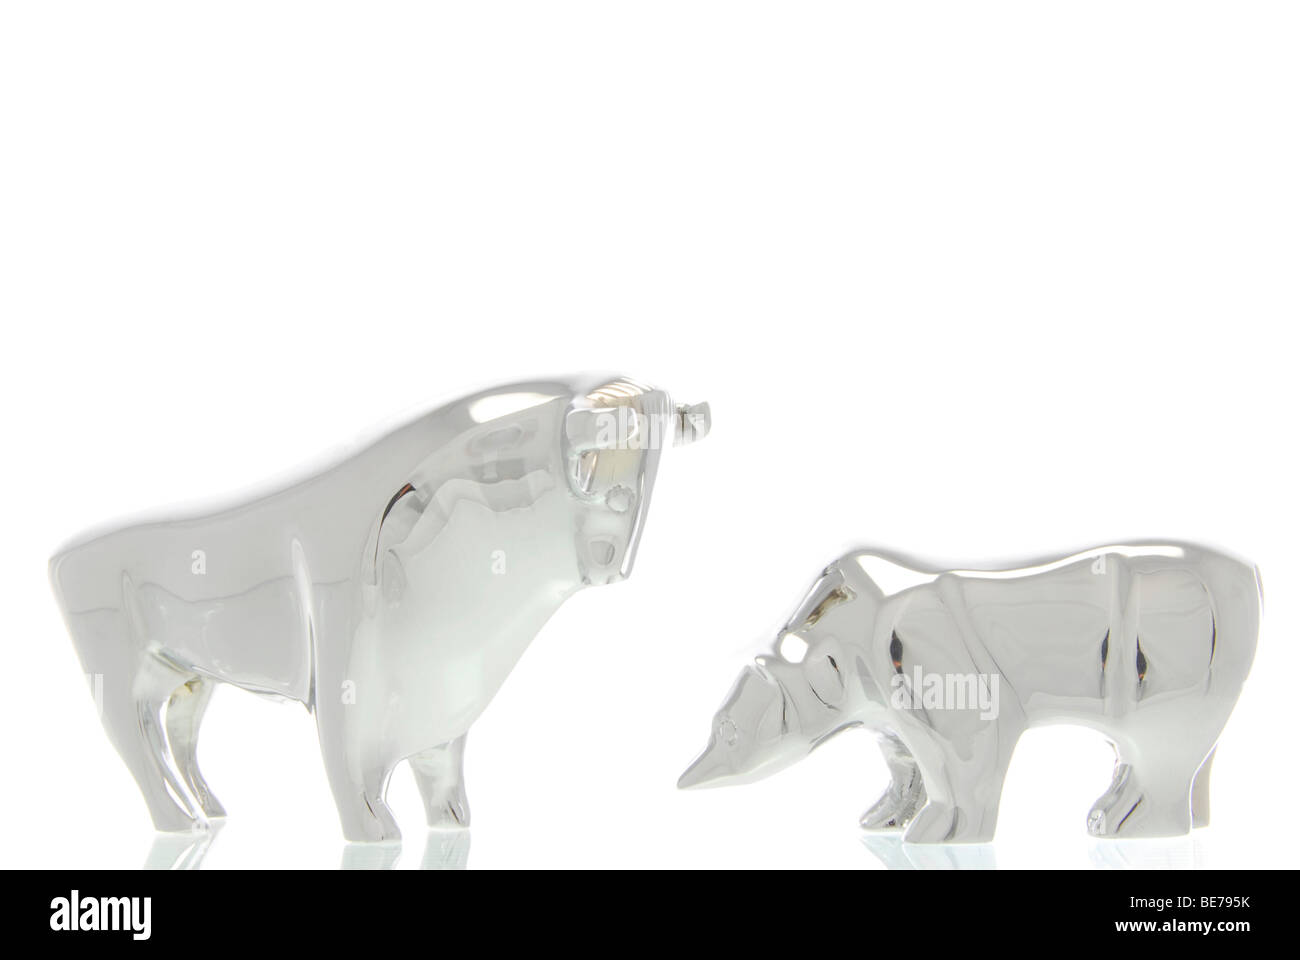 Bull and bear figurines, symbolic image for the stock exchange Stock Photo